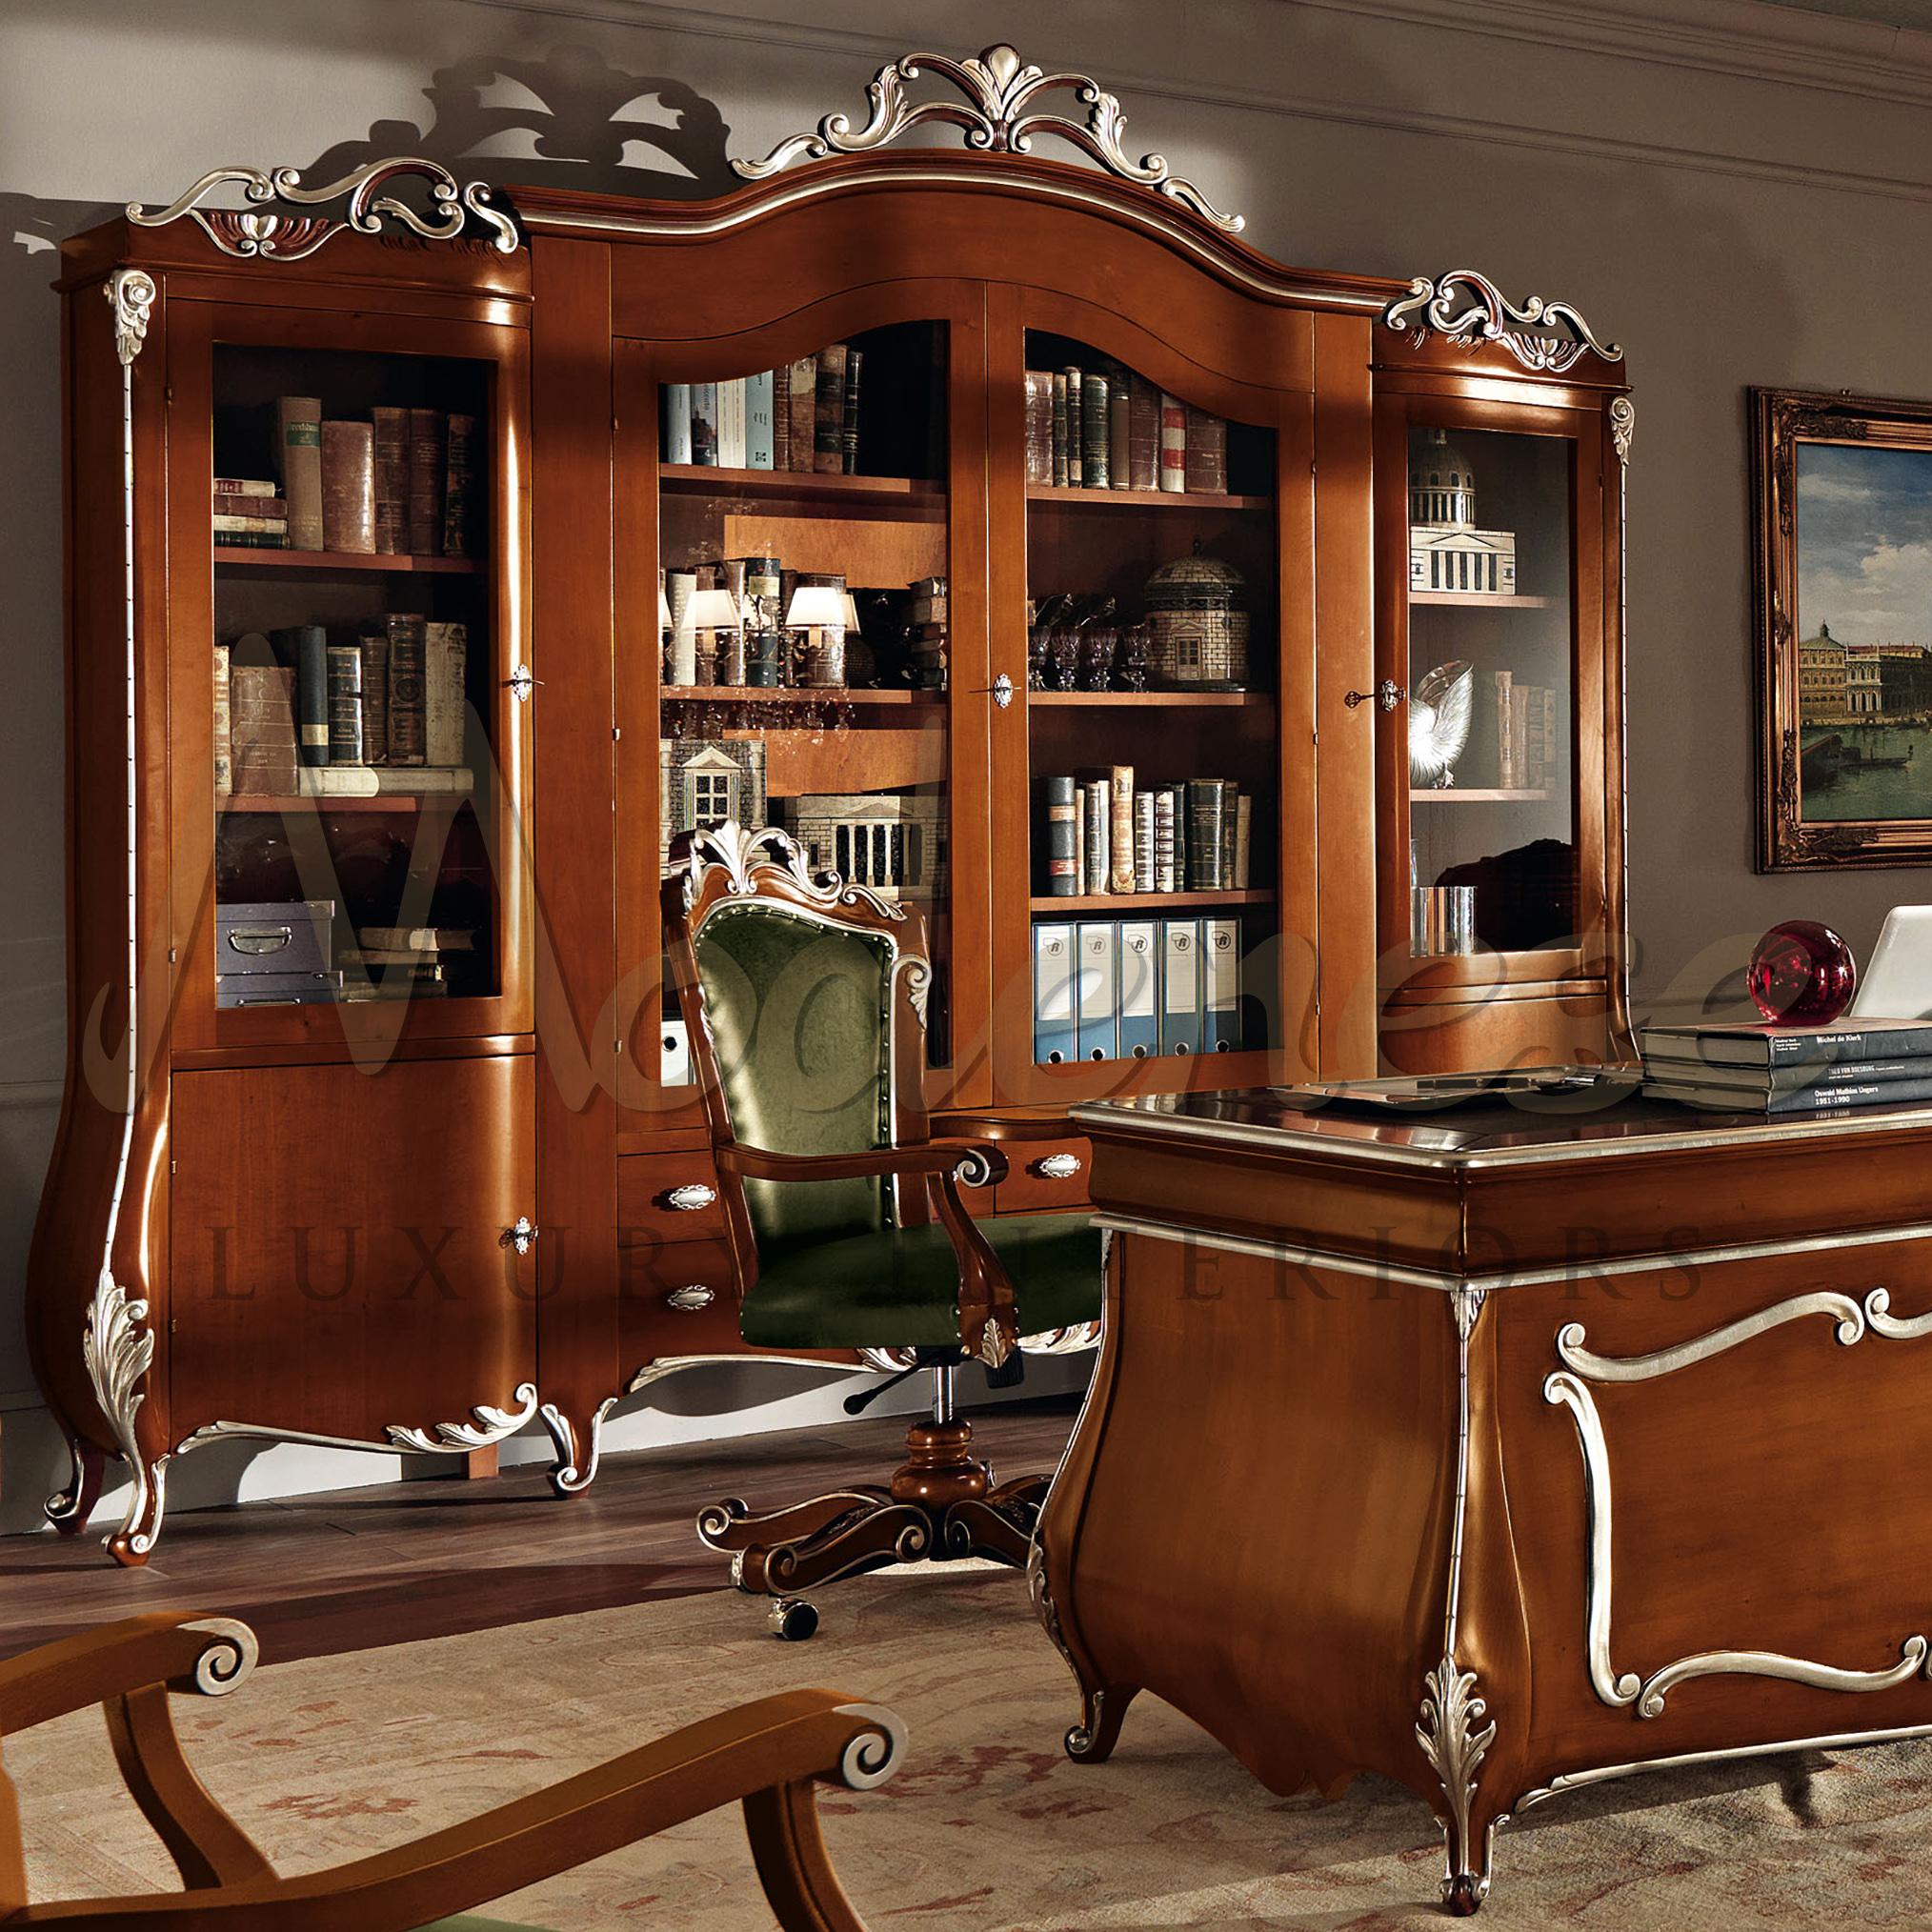 Modenese Gastone Interiors can be the perfect partner for your exclusive presidential office interior design project. This high-end four door vitrine bookcase in solid wood, with natural finish and silver leaf hand decorated details, defintely has a